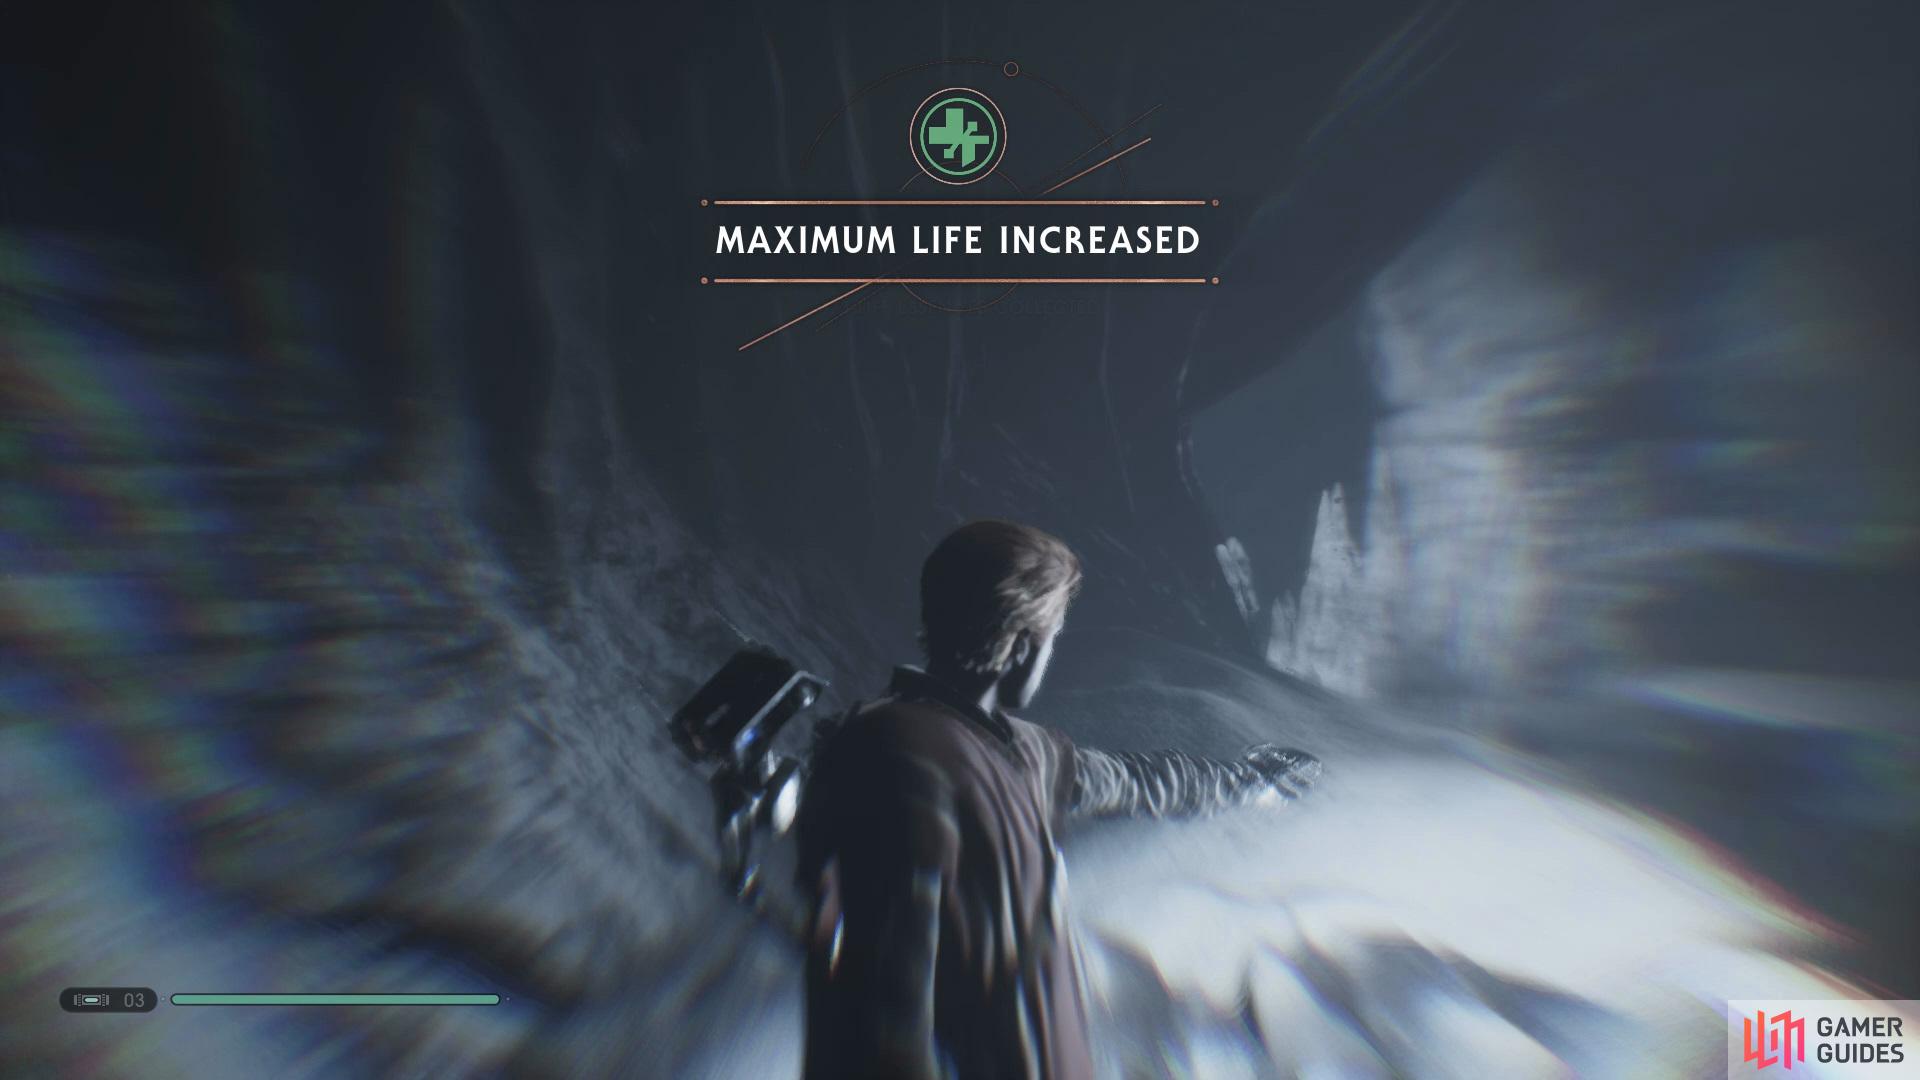 You'll be able to find the final Life Essence at the end of a Wall Run section..